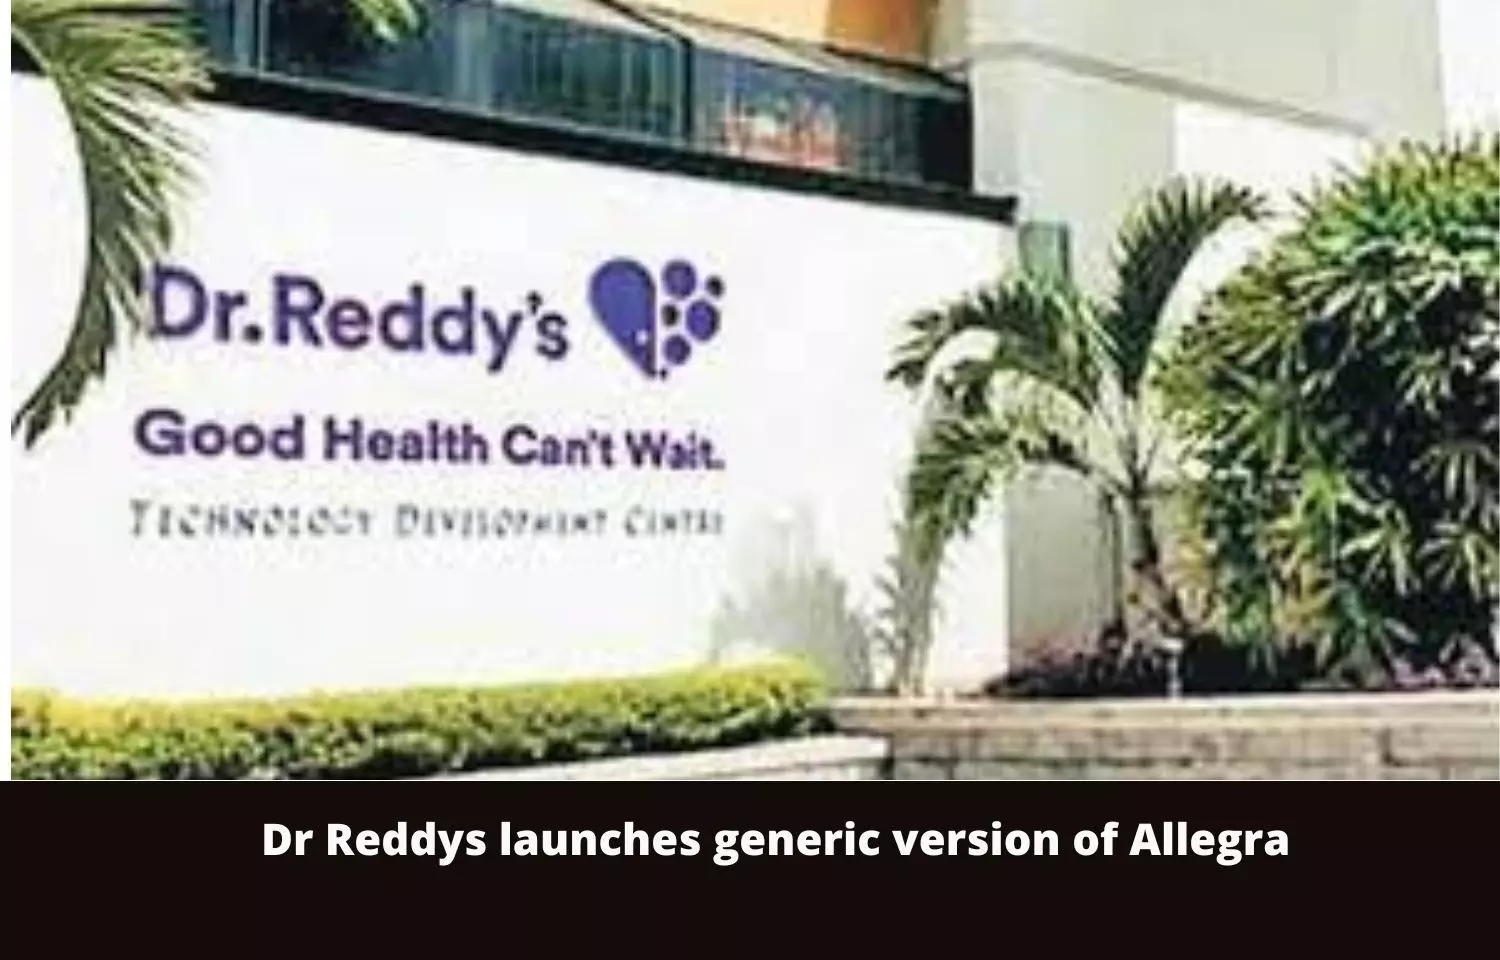 Dr Reddys Labs launches generic version of Allegra in US